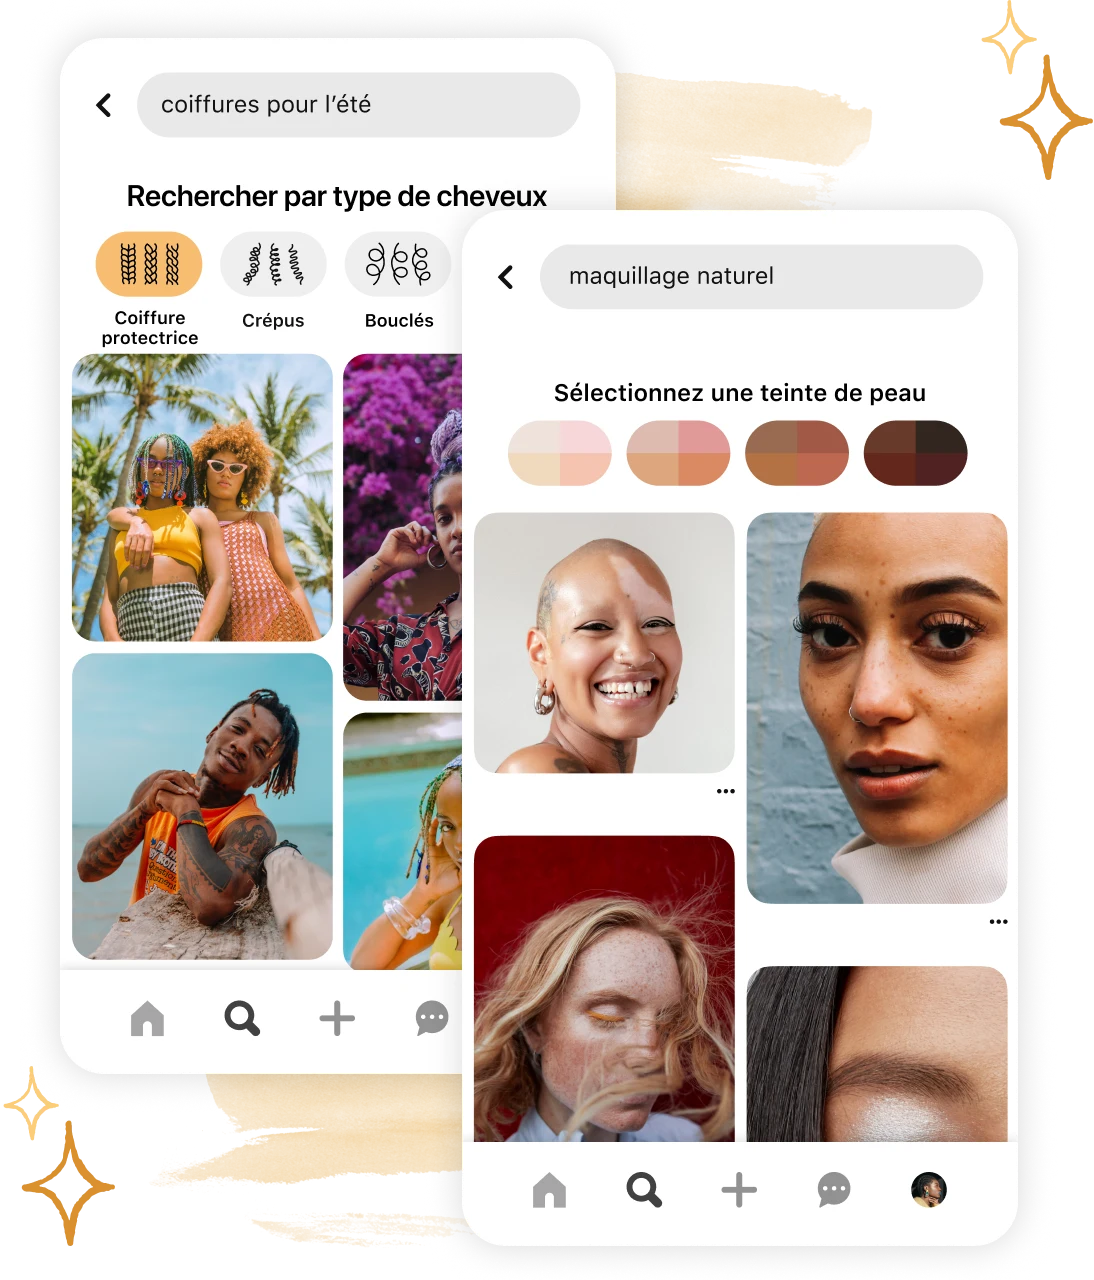 Pinterest app UI showing new search refinement tools for hair pattern and skin tone.